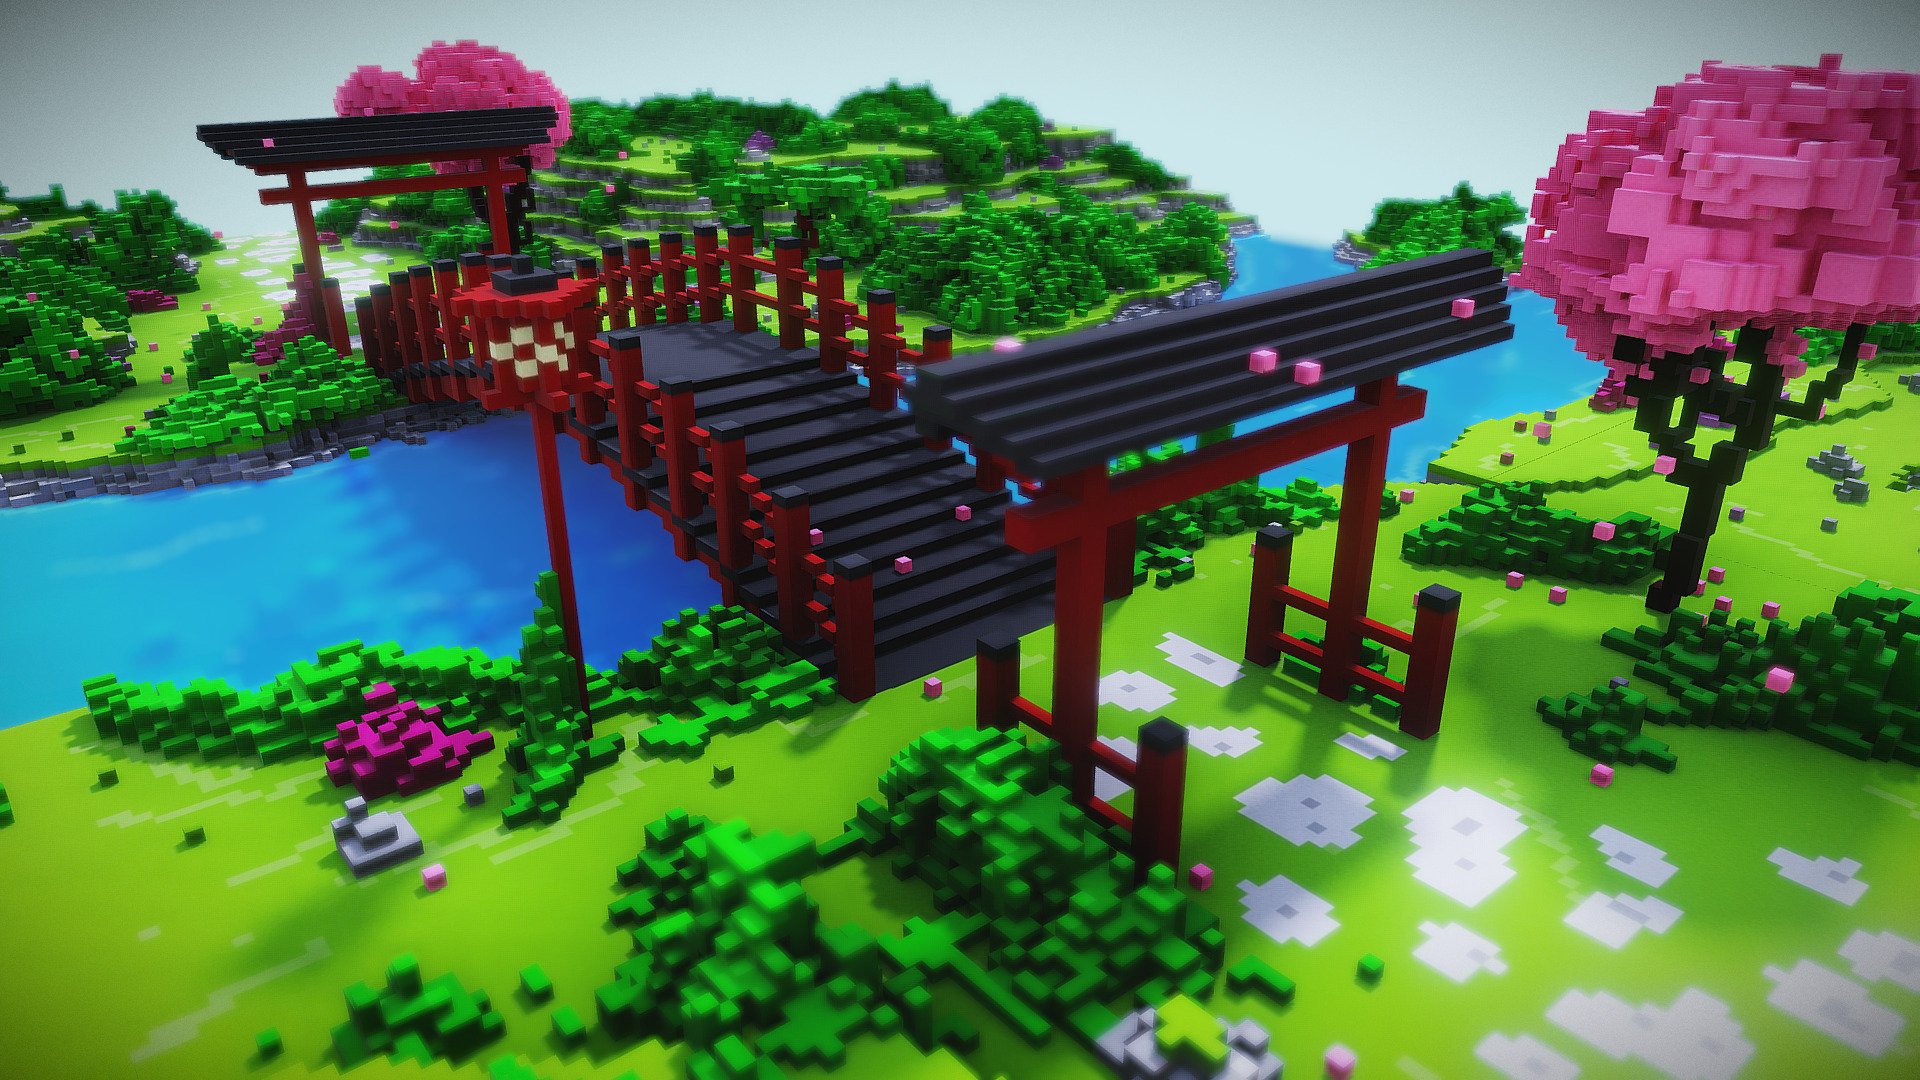 First try to make a landscape in voxel.

Made with MagicaVoxel, VoxelShop and Blender 3d model